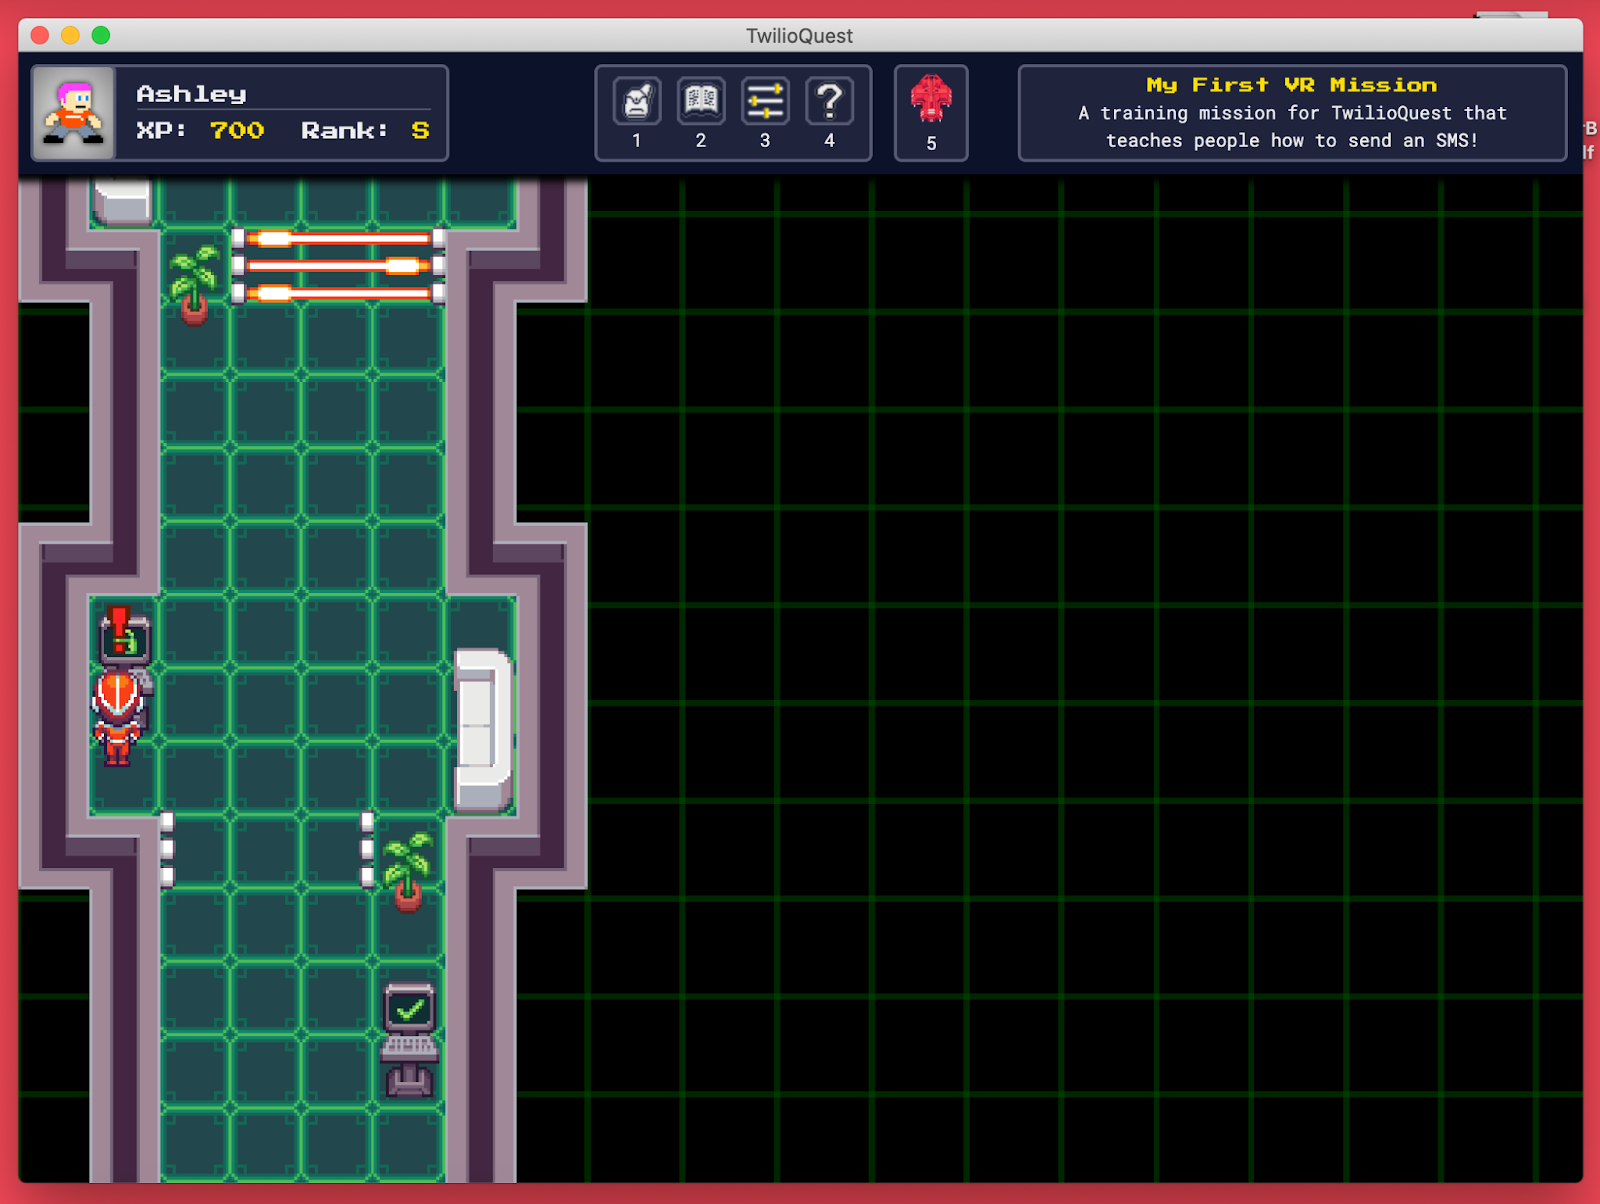 Screenshot of TwilioQuest game showing first laser barrier open